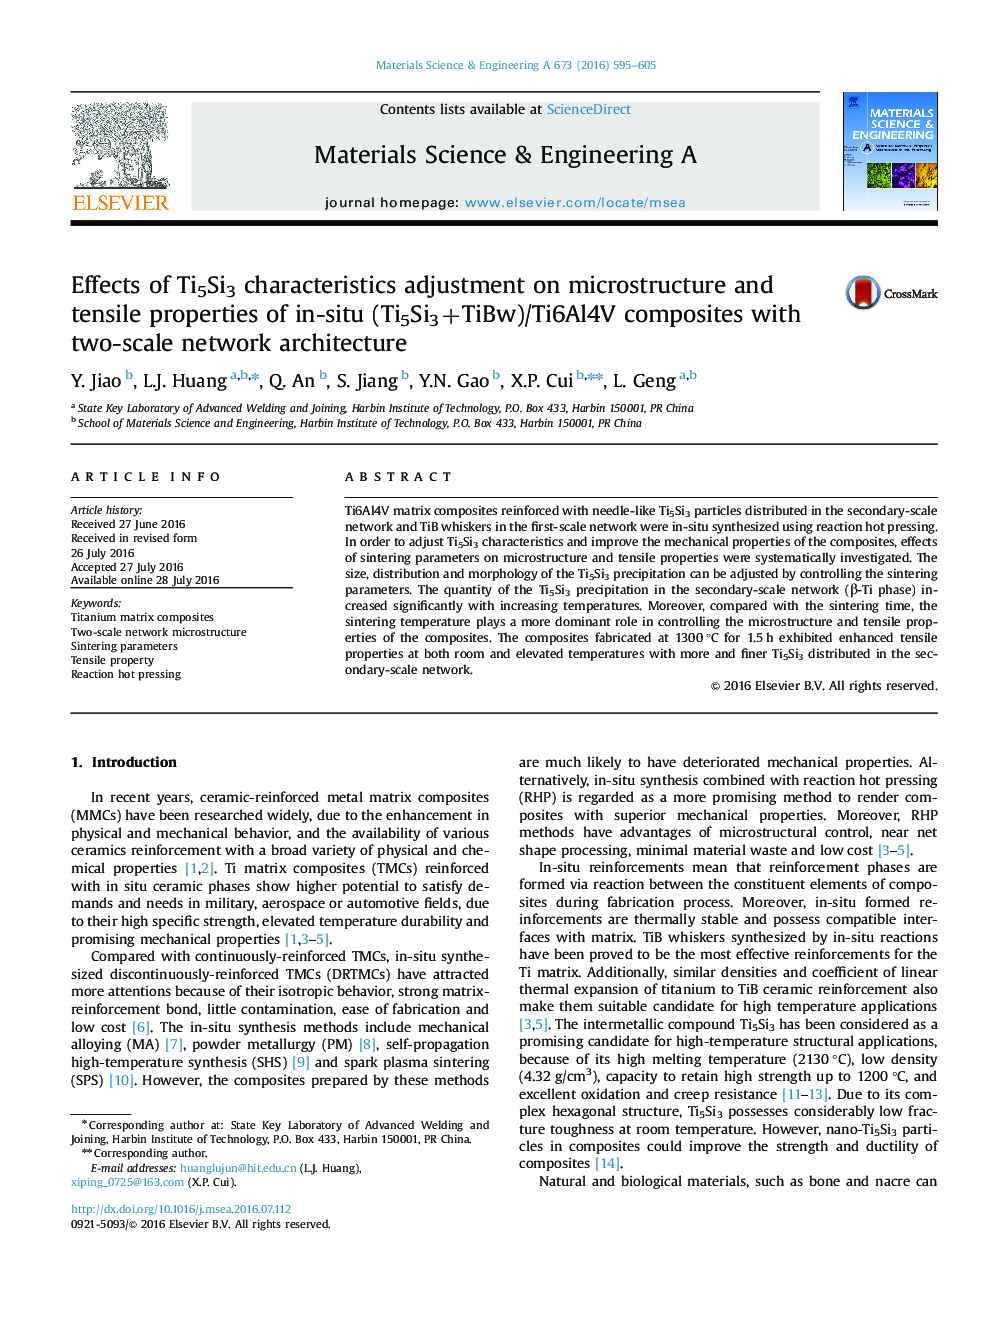 Effects of Ti5Si3 characteristics adjustment on microstructure and tensile properties of in-situ (Ti5Si3+TiBw)/Ti6Al4V composites with two-scale network architecture